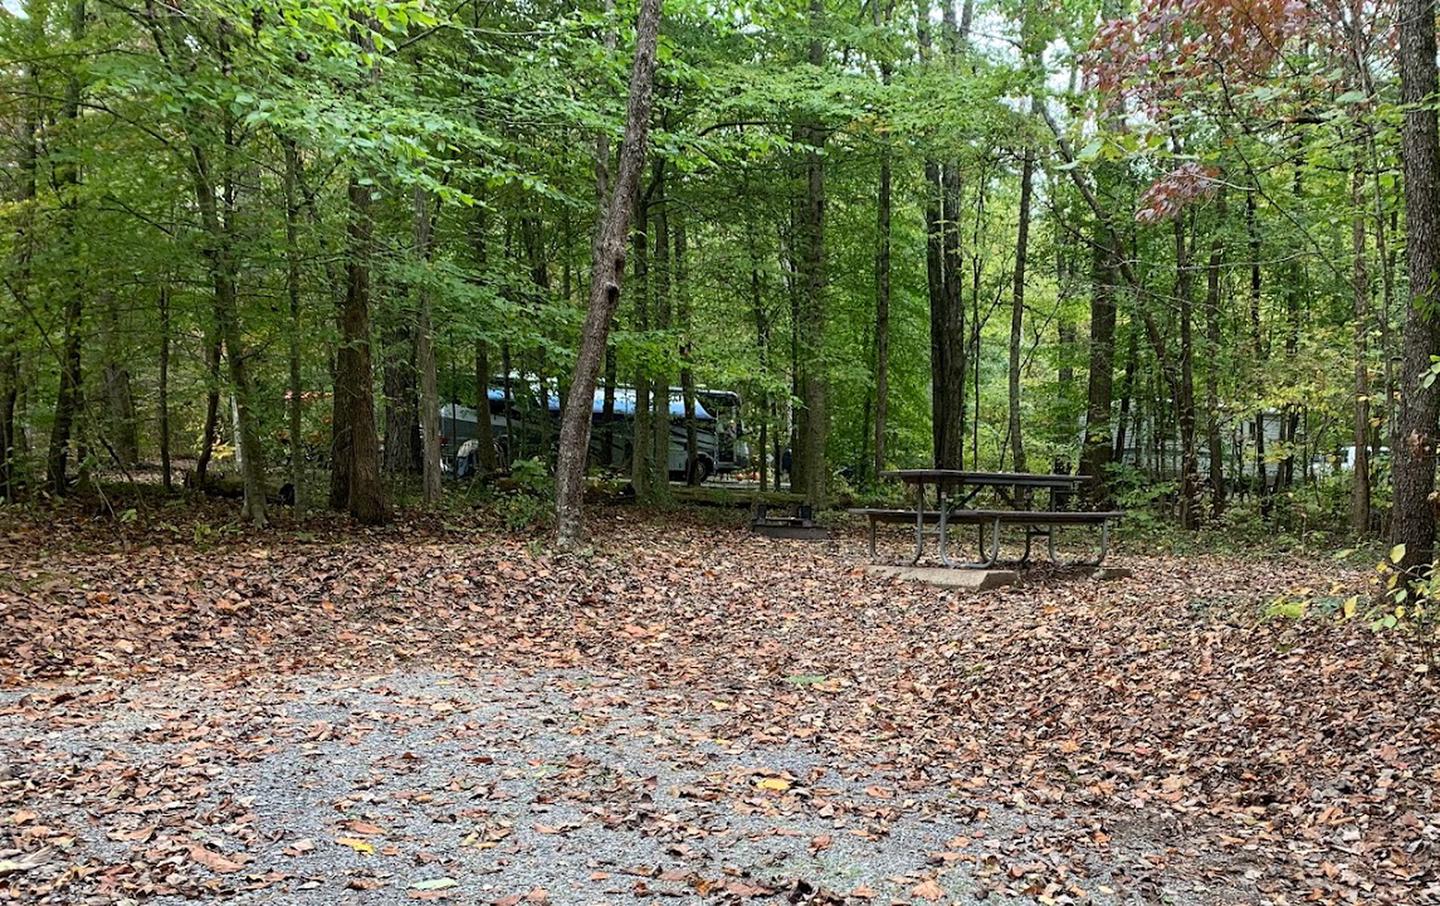 Gravel area with brown leaves on the ground with a circle fire ring and picnic table.D-23 tent space.